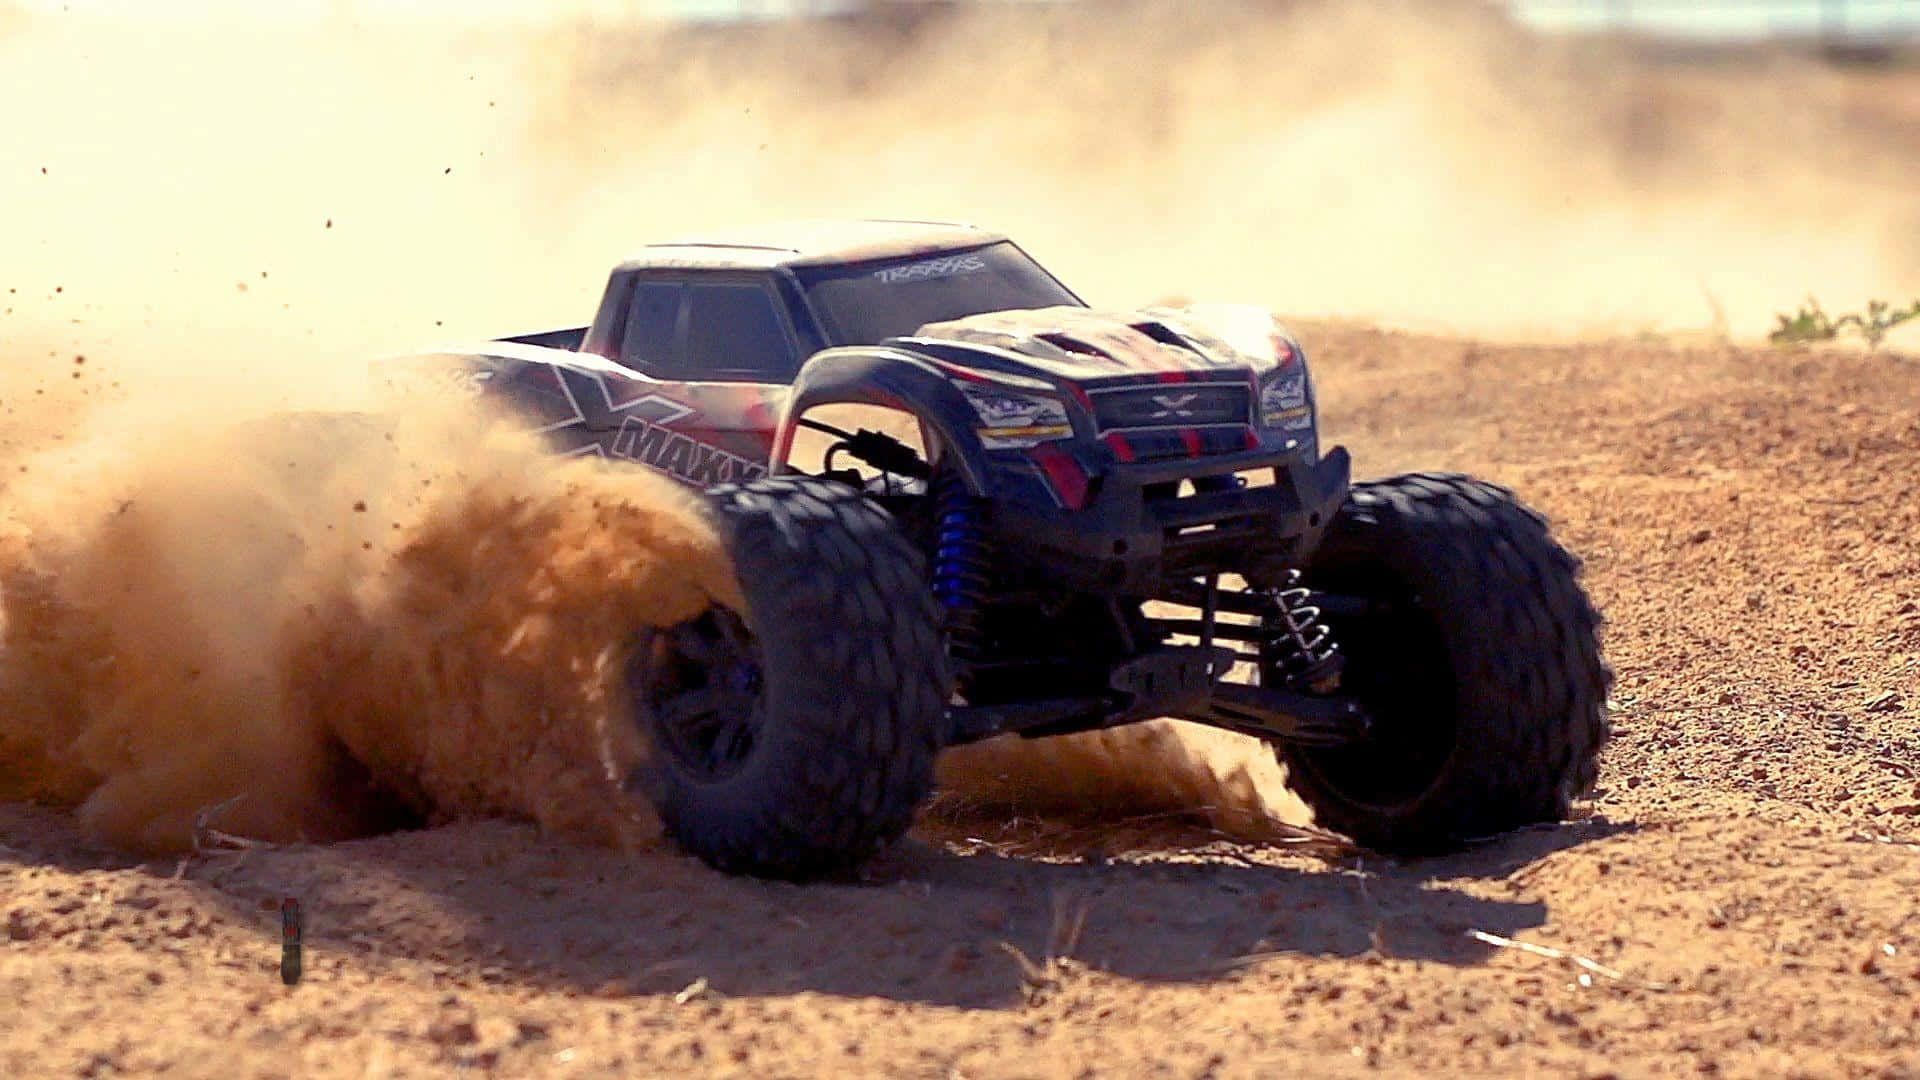 Race Your Way To Victory With This Rc Car